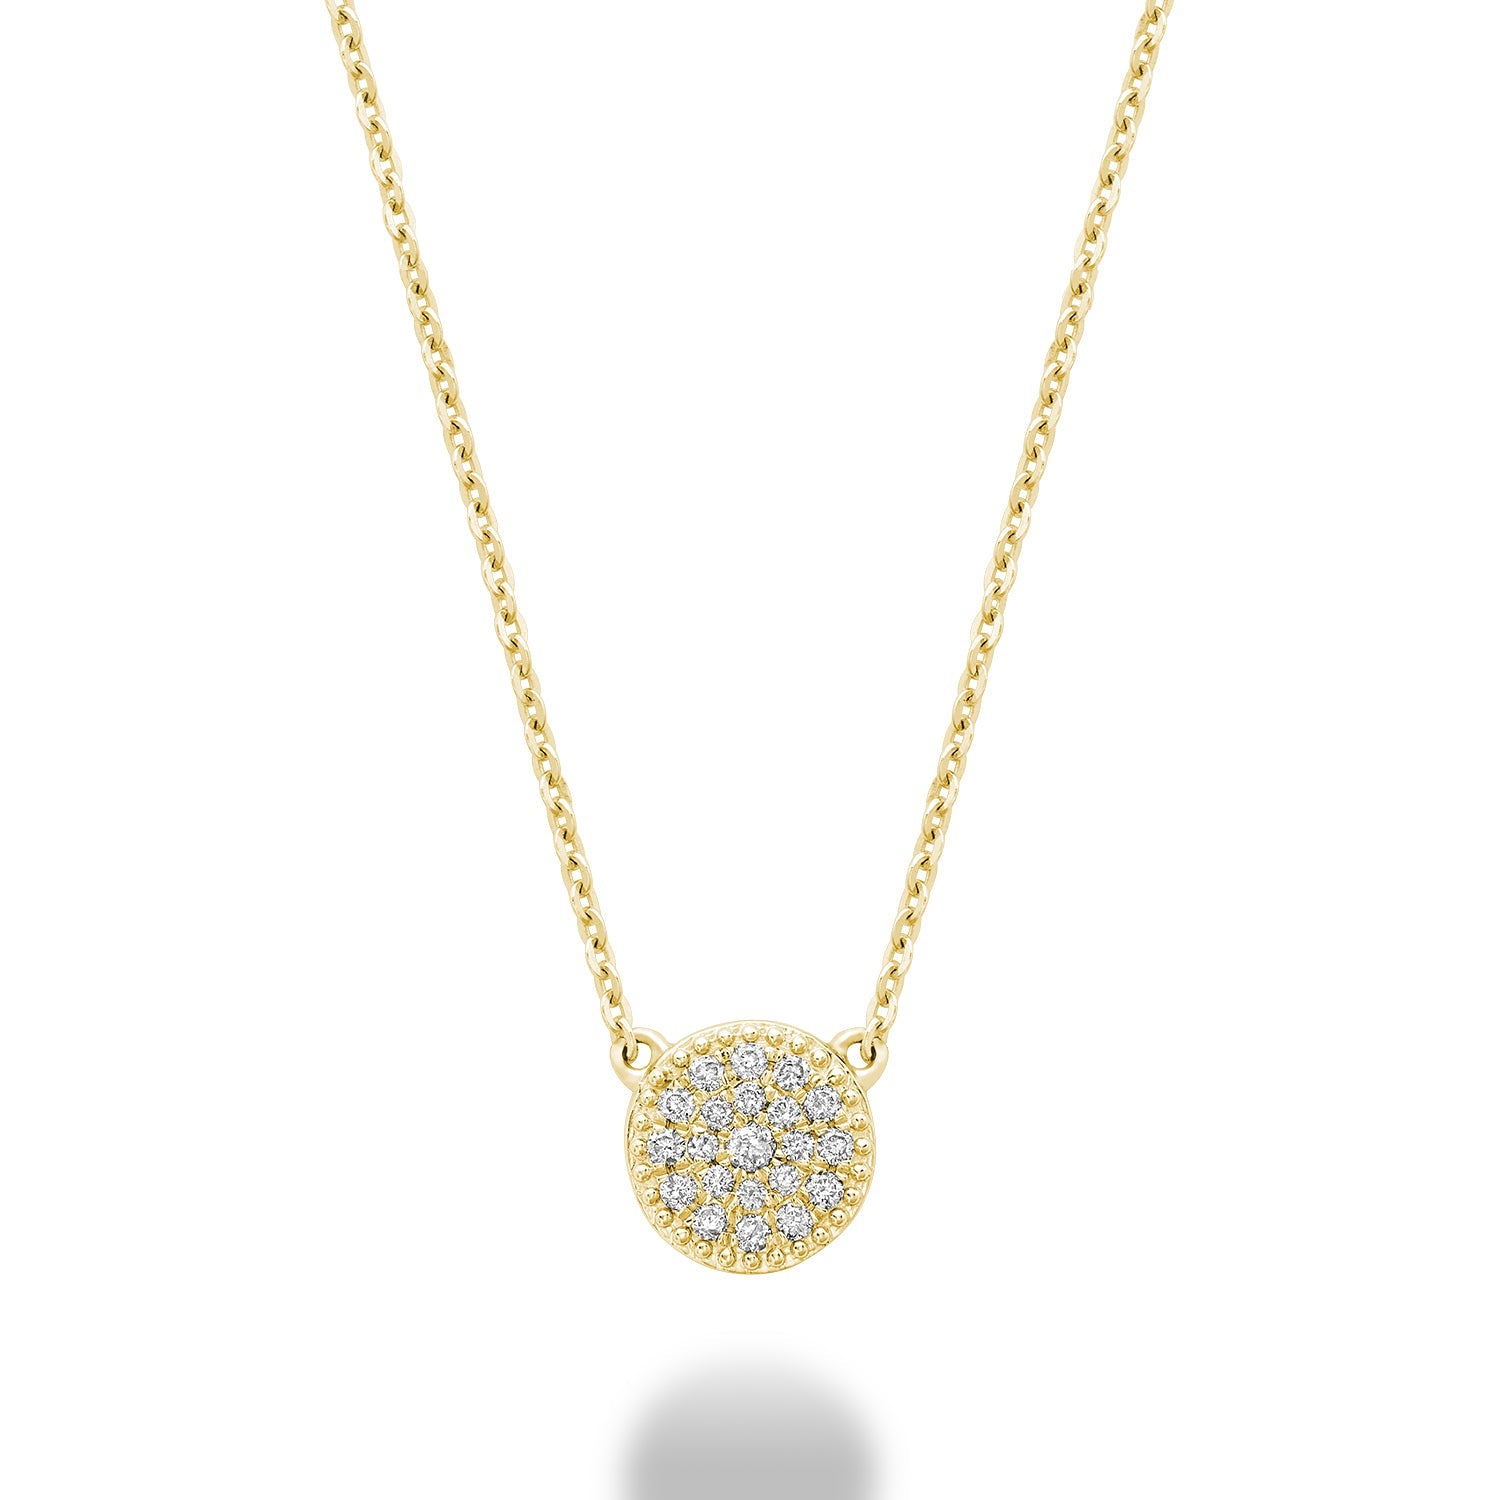 A close-up of a yellow gold diamond pave necklace. The necklace features a total of 0.10ct of diamonds set in a pave style. The diamonds are sparkling and eye-catching.